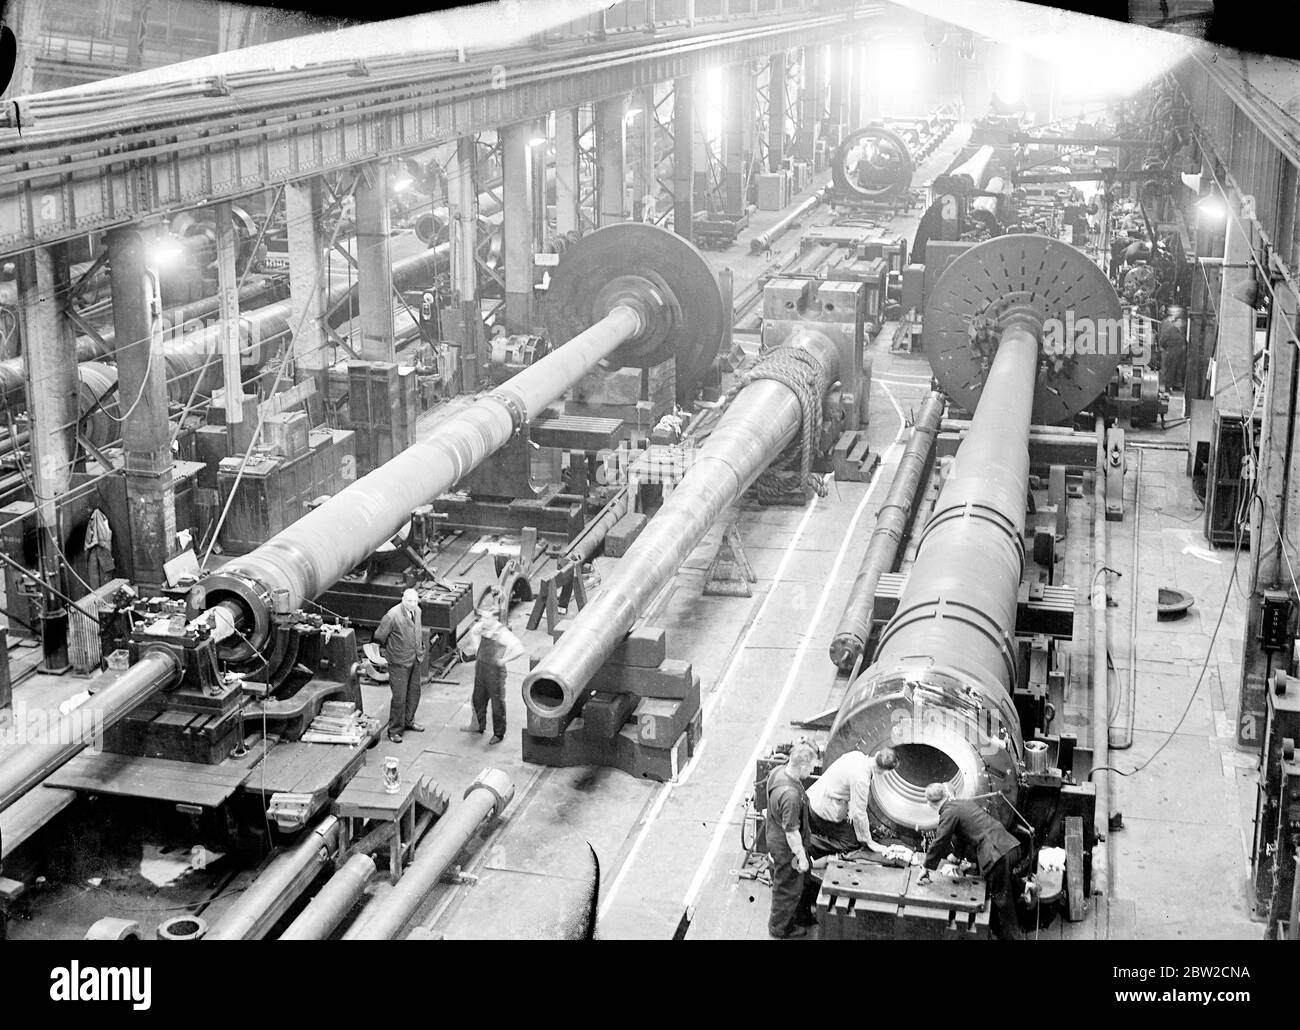 Where Britain forges victory. This pictures were taken in a Royal Ordinance factory of the Ministry of Supply where, thousands of workers are producing arms and ammunition which will help to ensure the victory of Britain and her Allies. Photo shows a general view of the big guns shop. 13 November 1939 Stock Photo